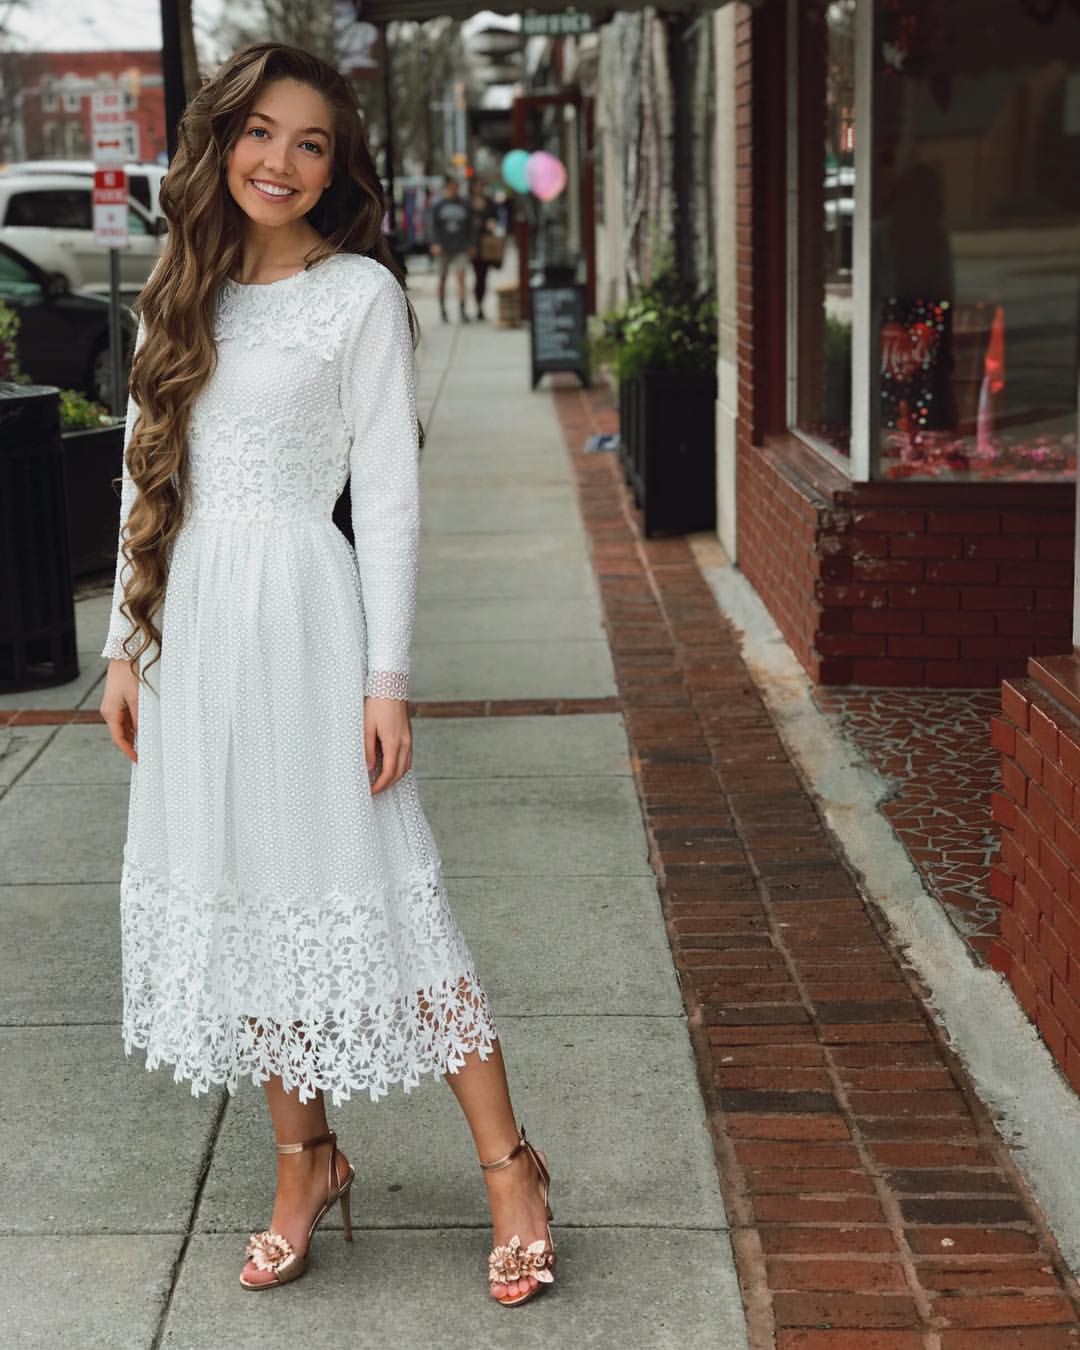 Outfit Ideas For Church, Modest fashion, Wedding dress: party outfits,  Cocktail Dresses,  Wedding dress,  Maxi dress,  Fashion week,  Church Outfit,  Sunday Church Outfit  